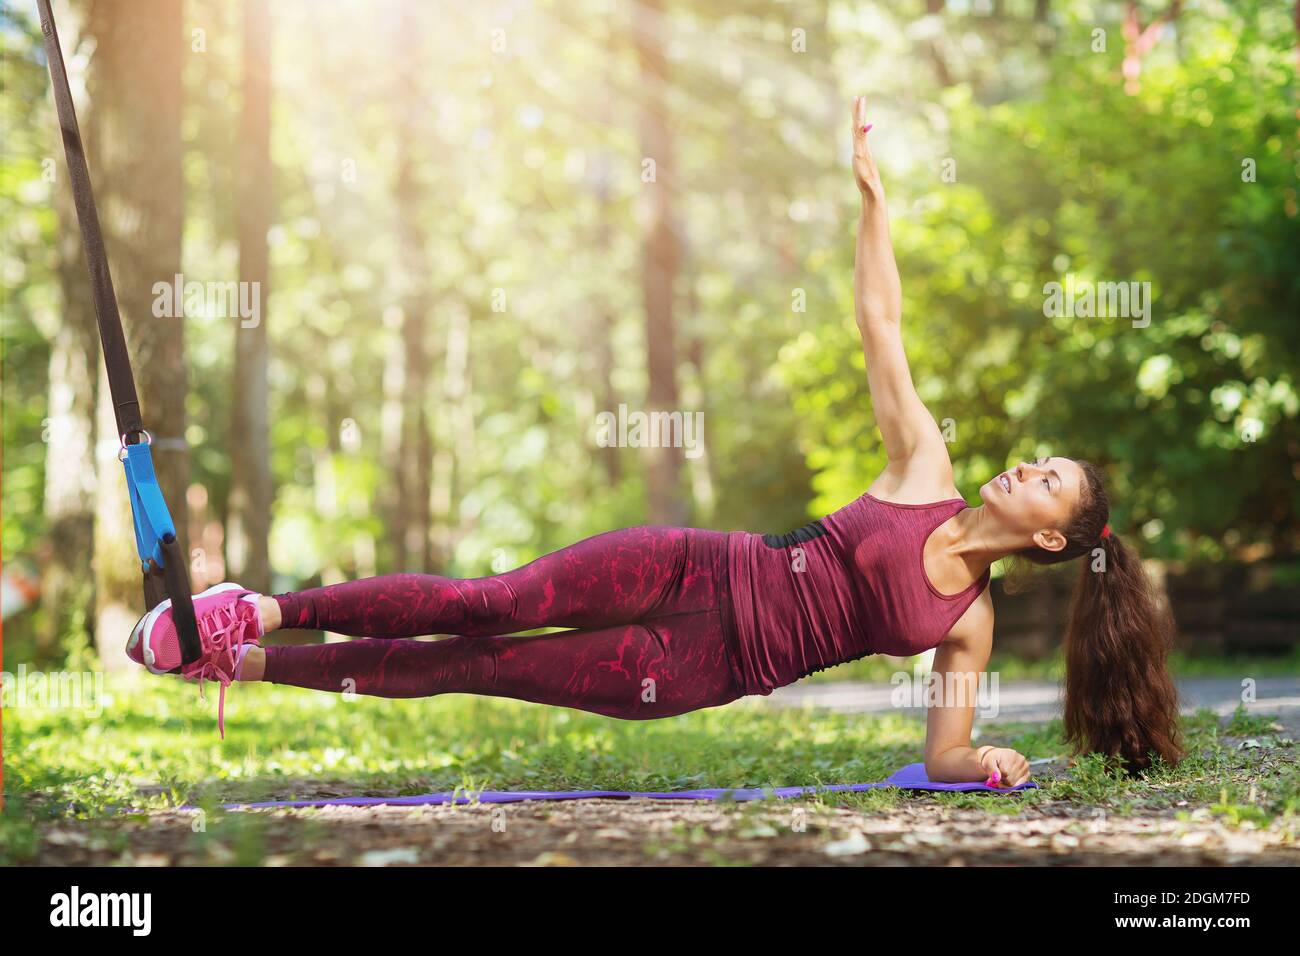 A young woman performs an abdominal exercise on a suspended machine attached to a tree in a park. Stock Photo